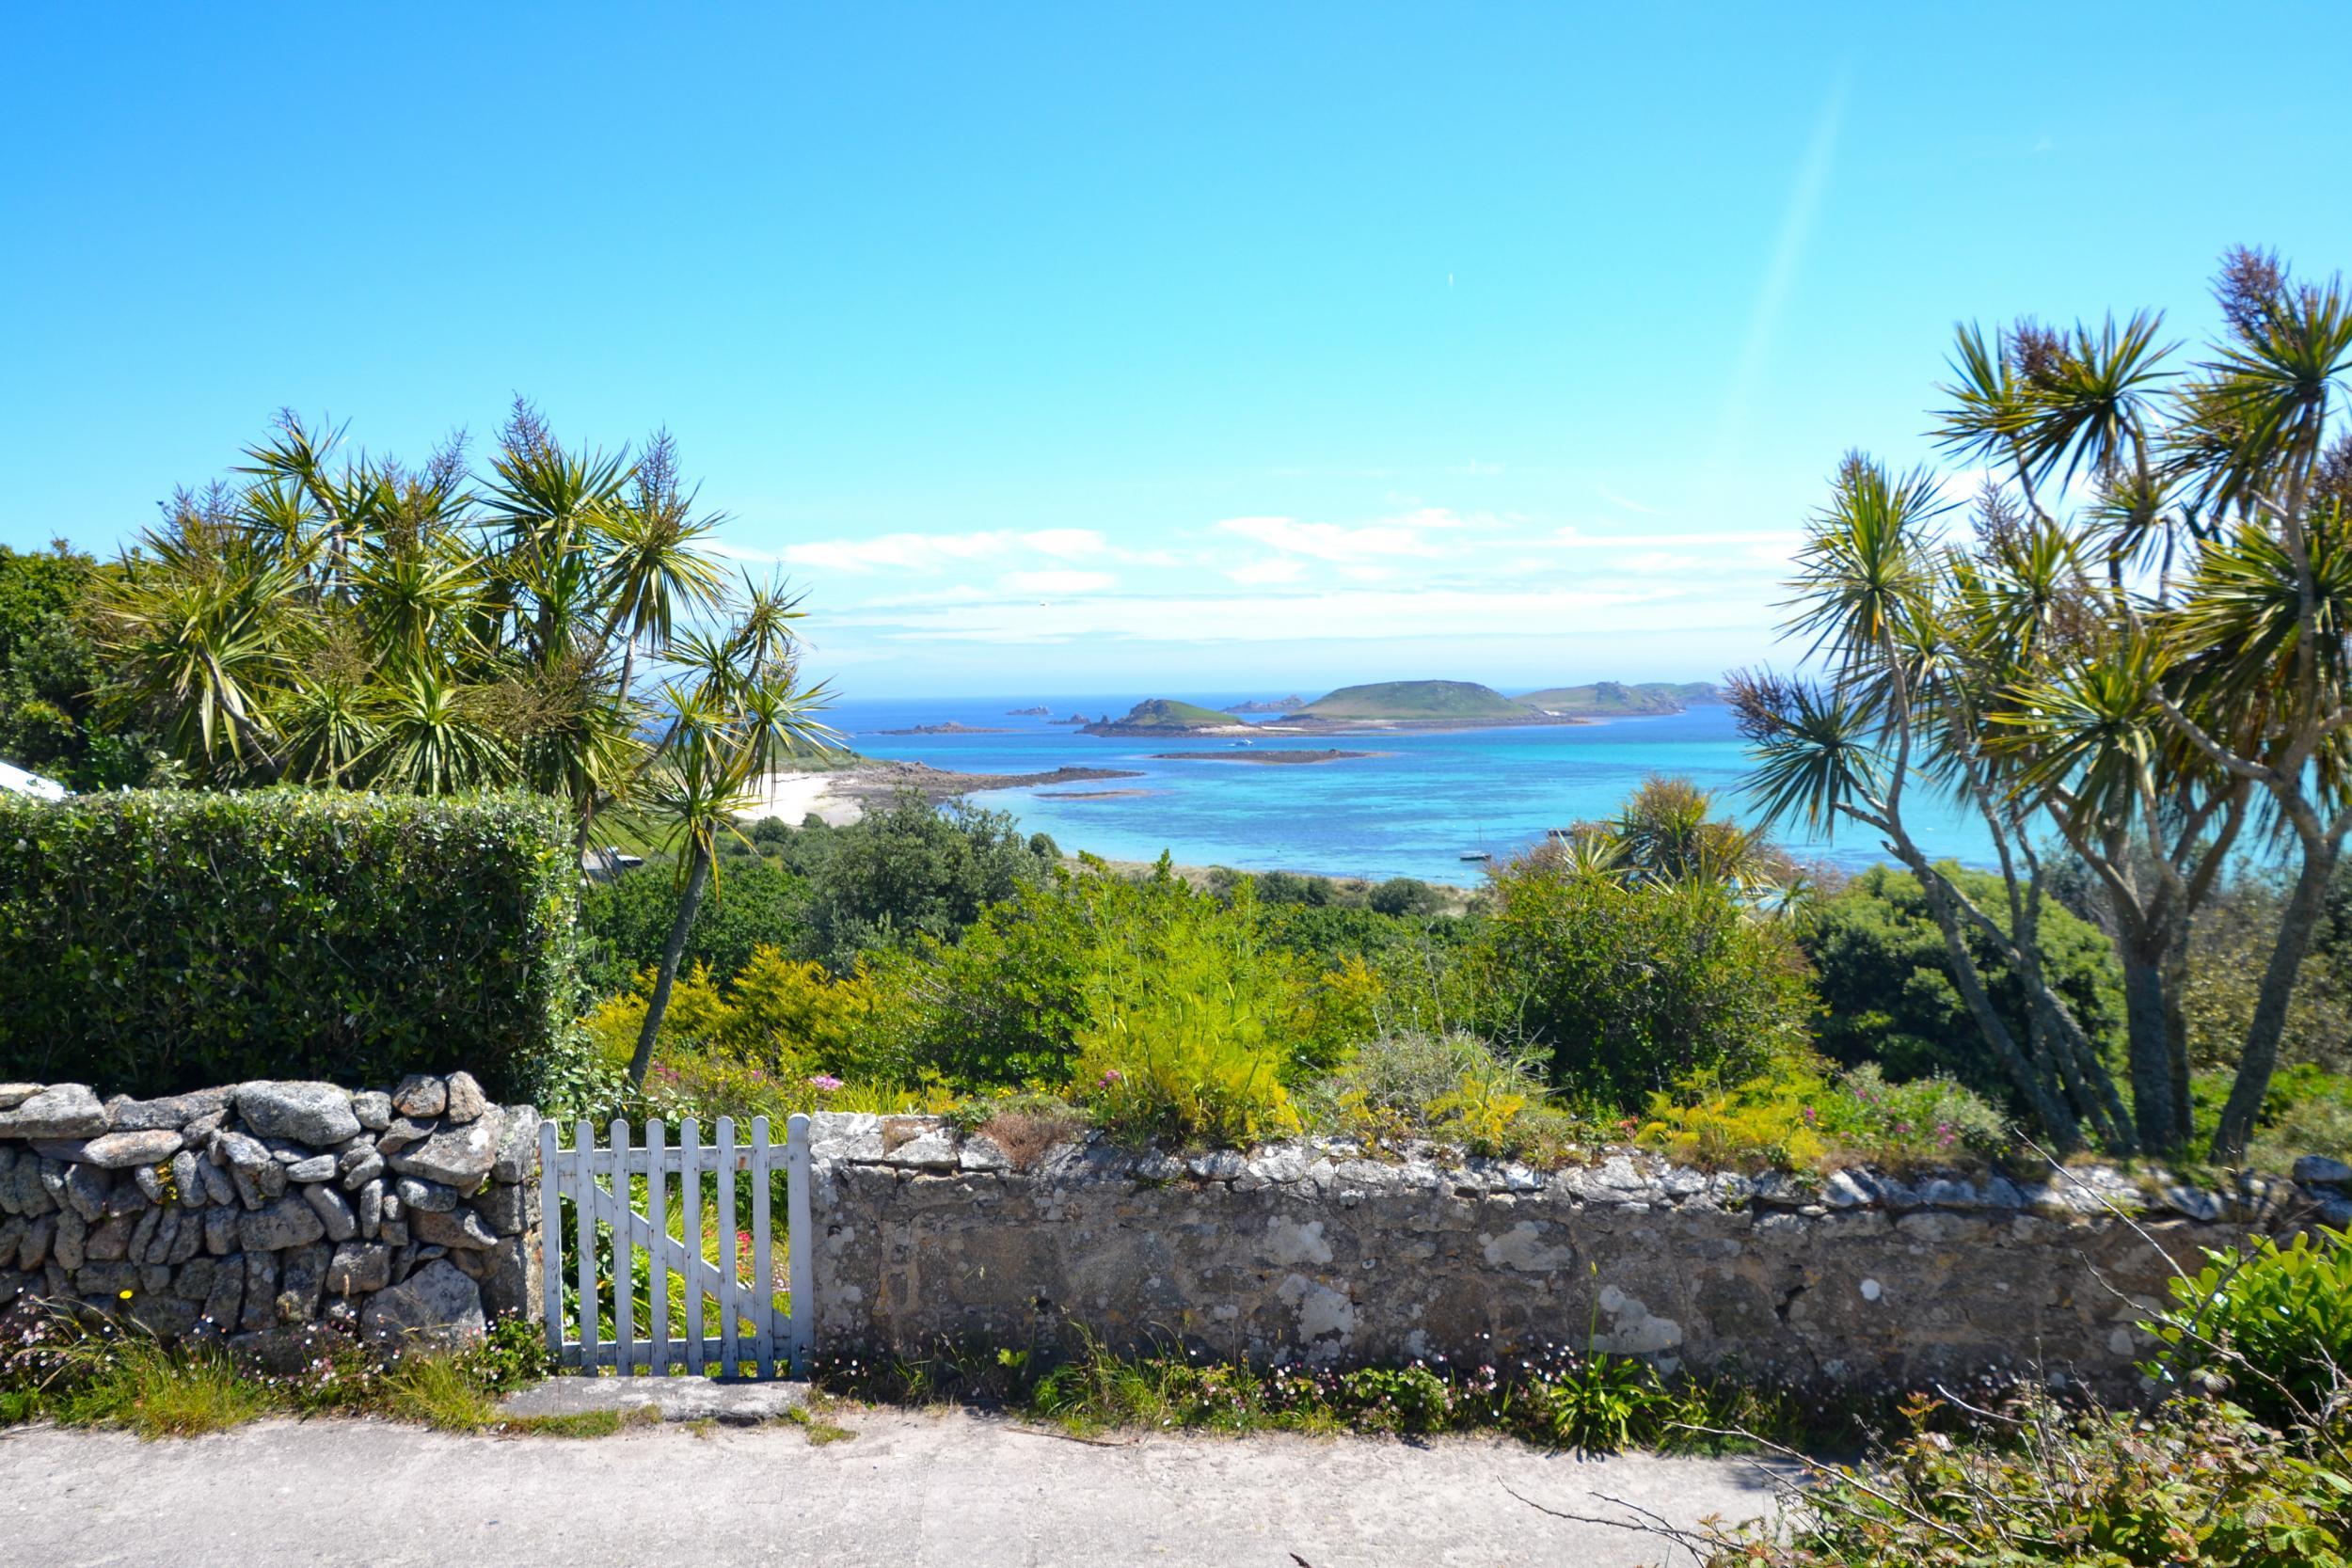 School Ben 10 Sex - Isles of Scilly: 10 reasons to visit UK's answer to the Maldives | The  Independent | The Independent